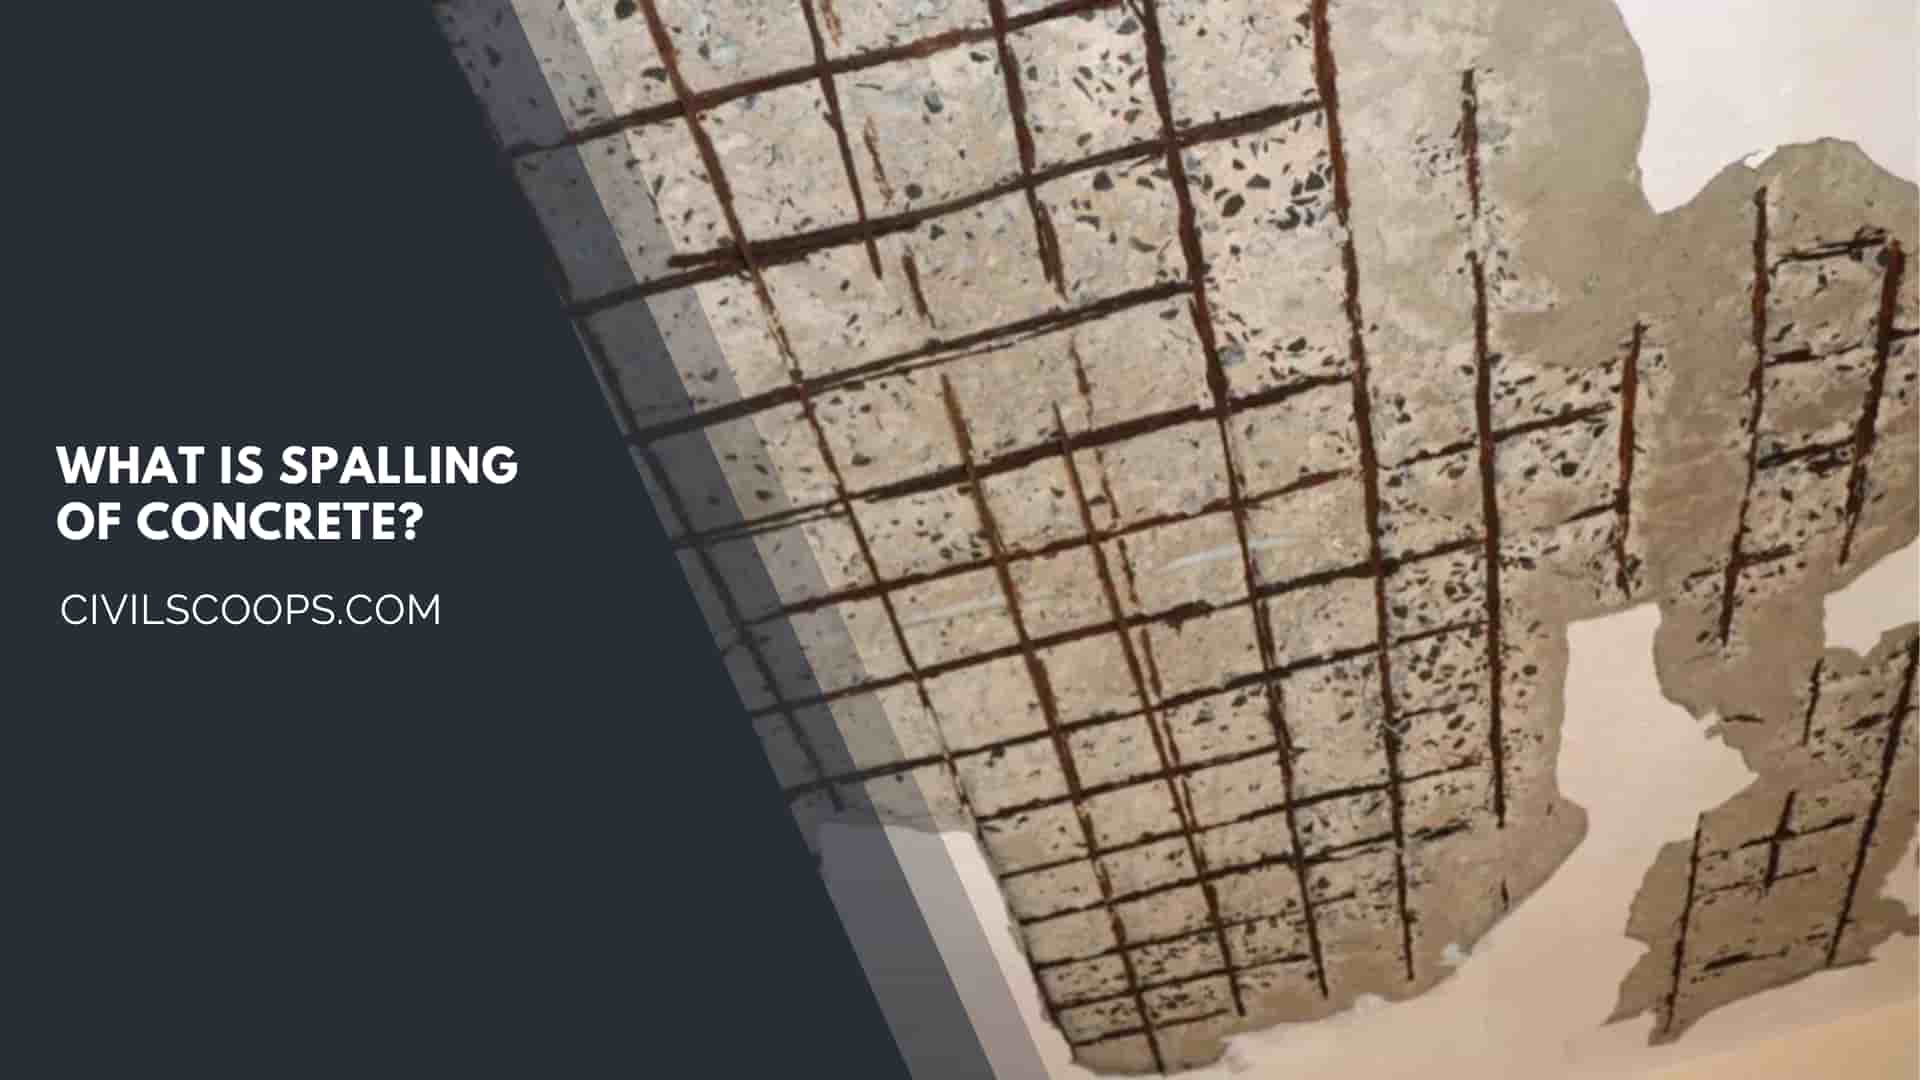 What Is Spalling of Concrete?